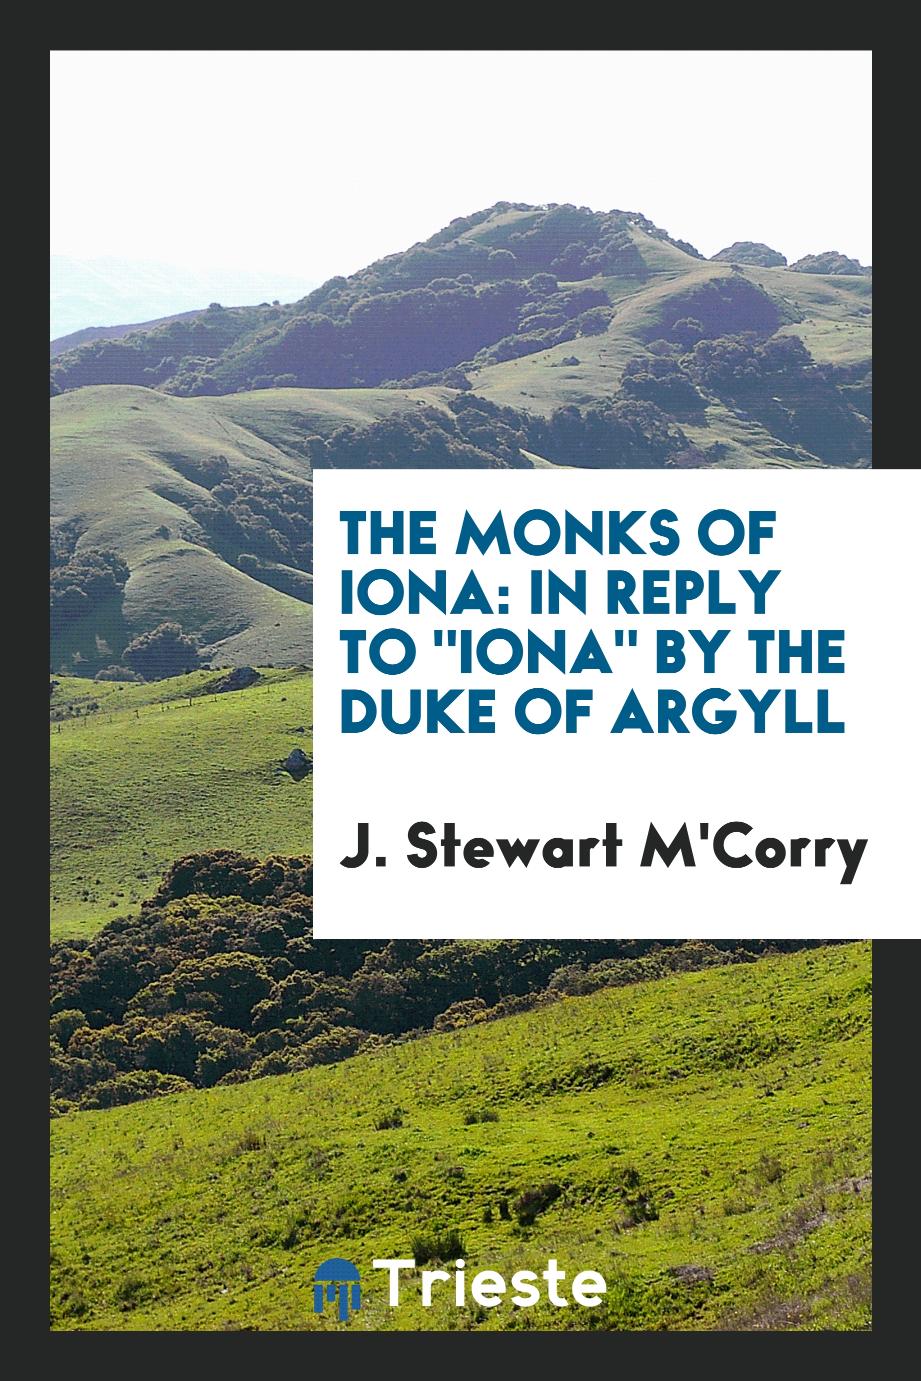 The monks of Iona: in reply to "Iona" by the Duke of Argyll